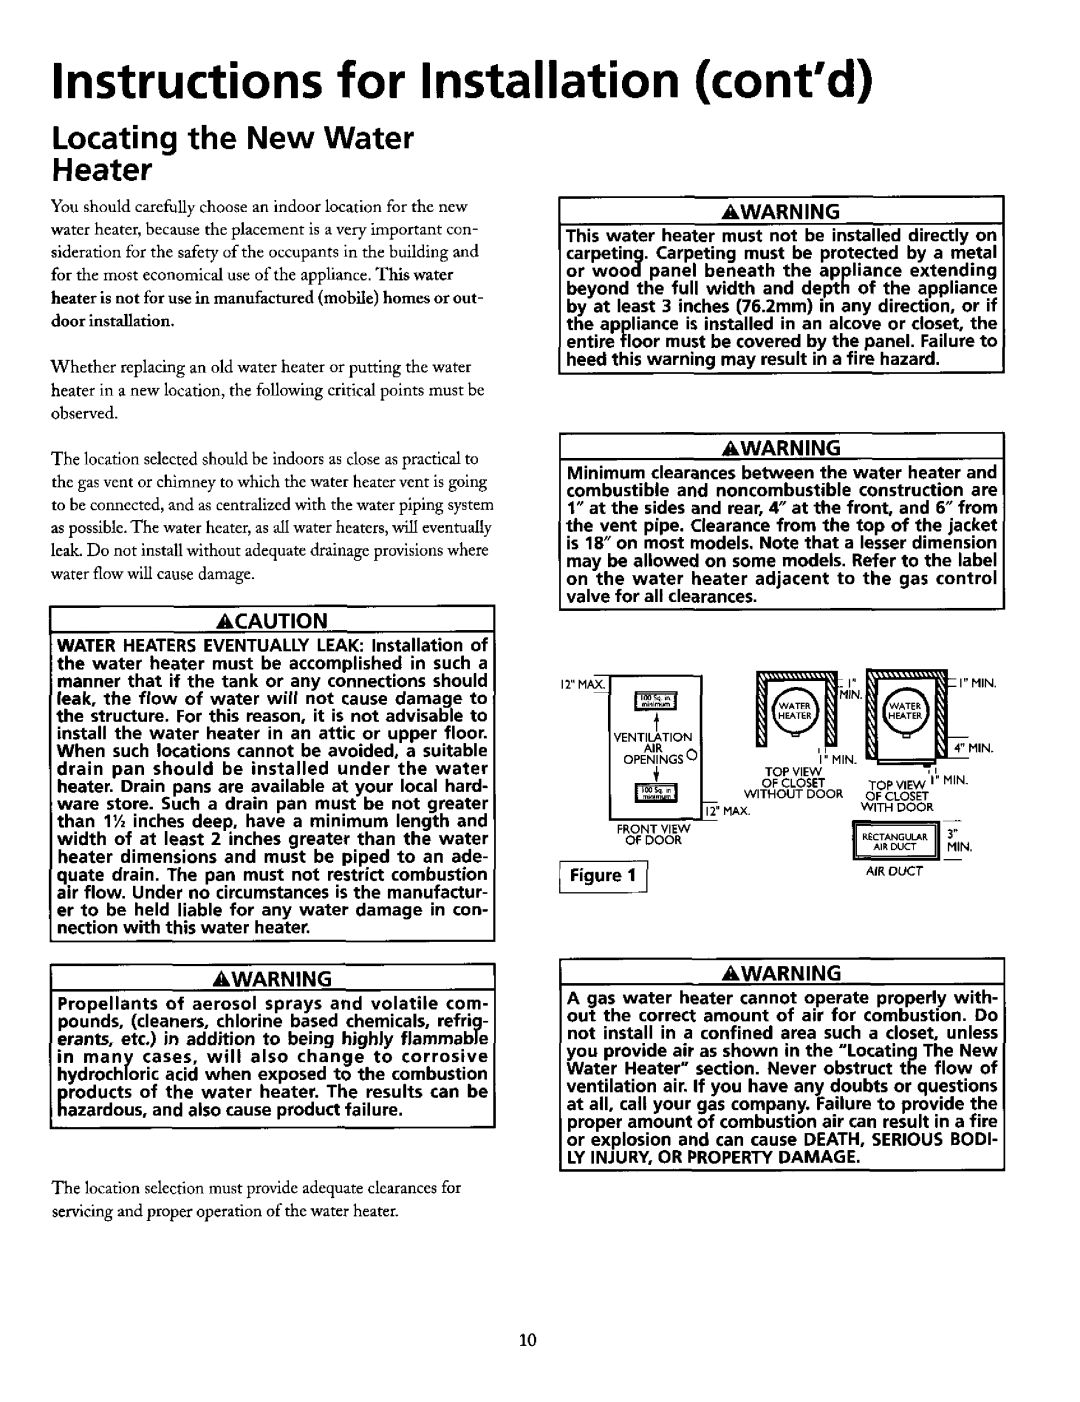 Maytag HN51240X, HN41240X manual Instructions for Installation contd, Locating the New Water Heater 